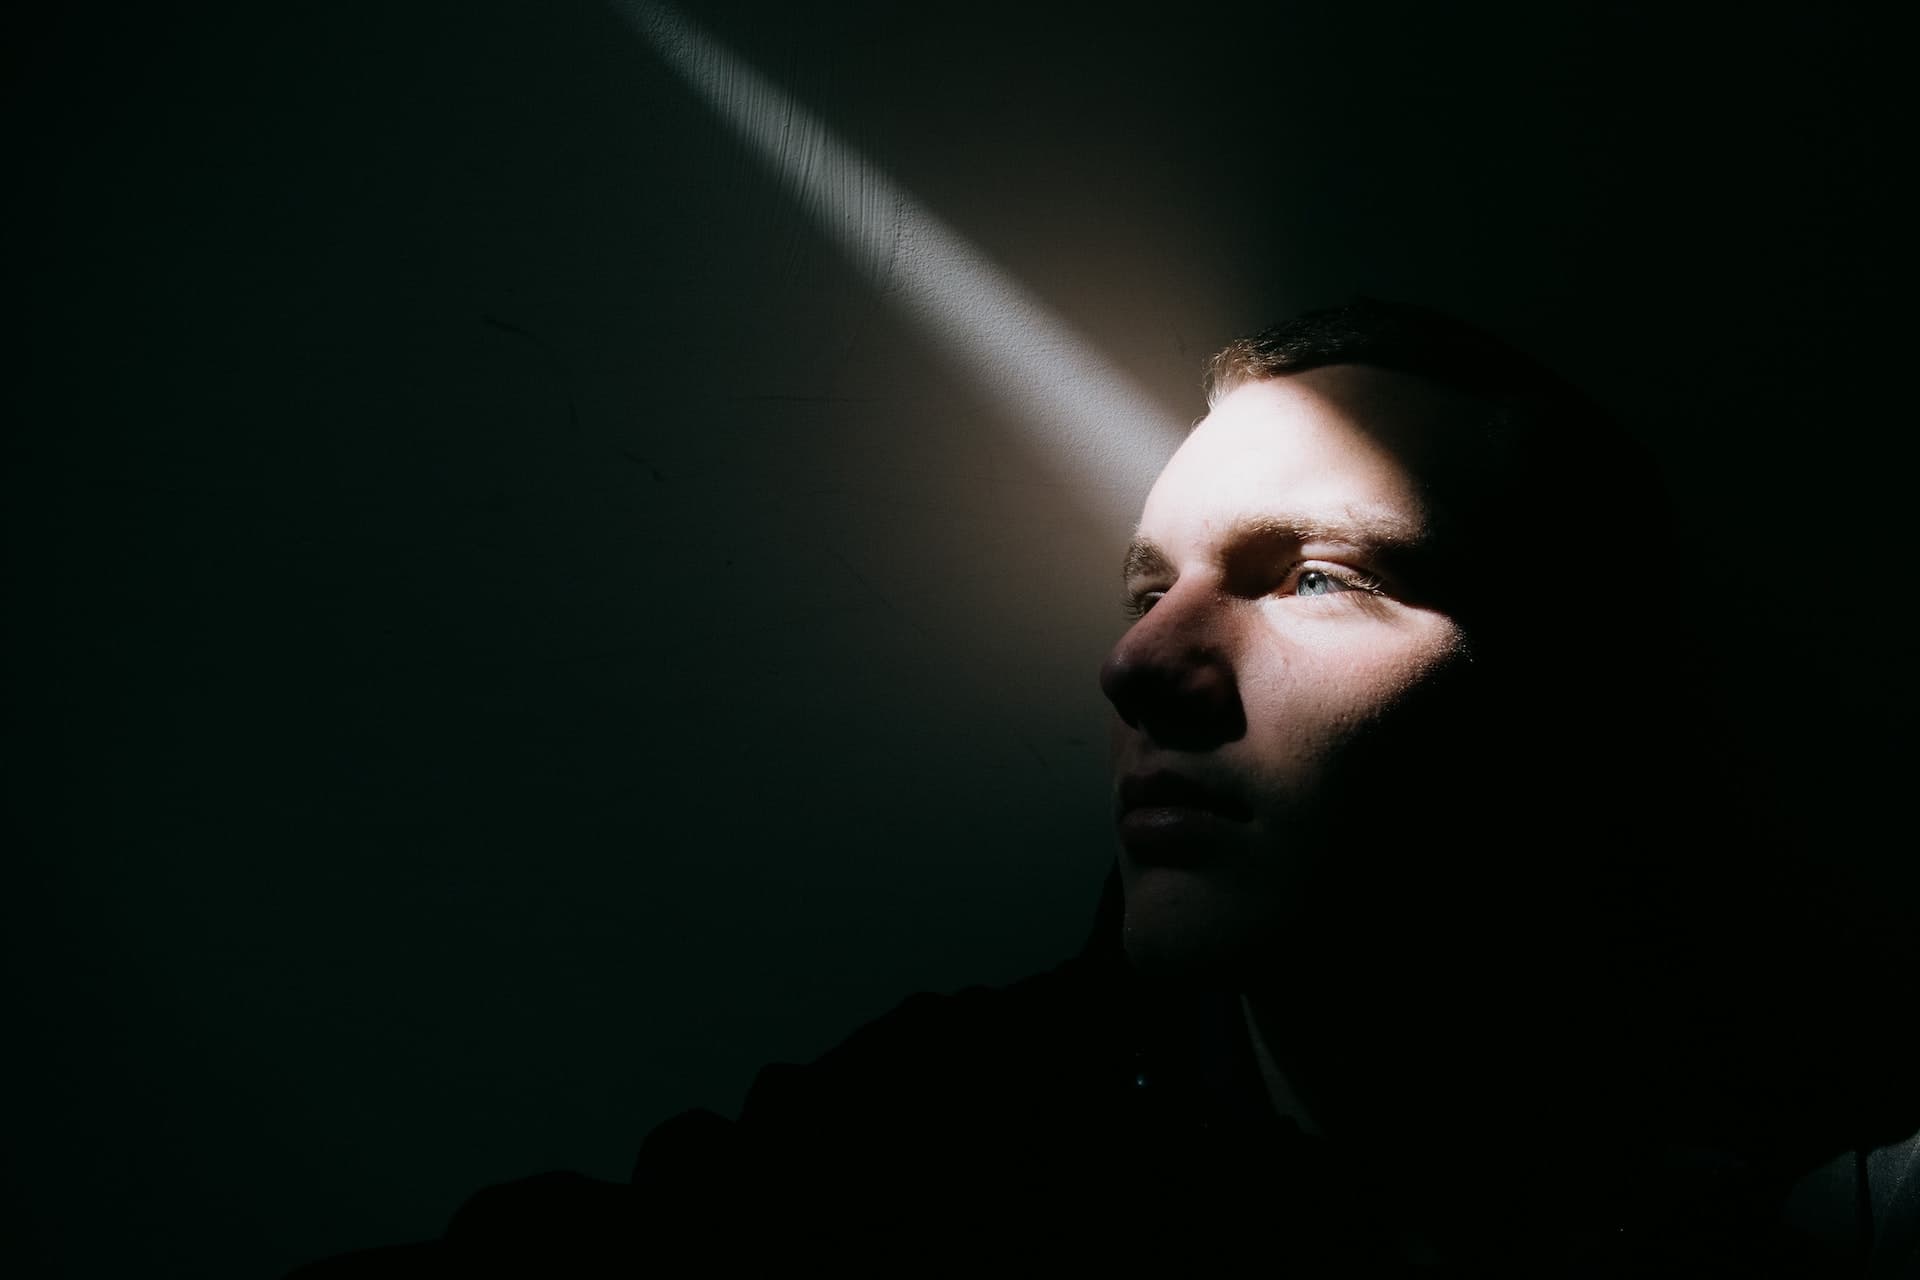 A man in a dark setting with a single spotlight shining into his left eye illuminating part of his face.